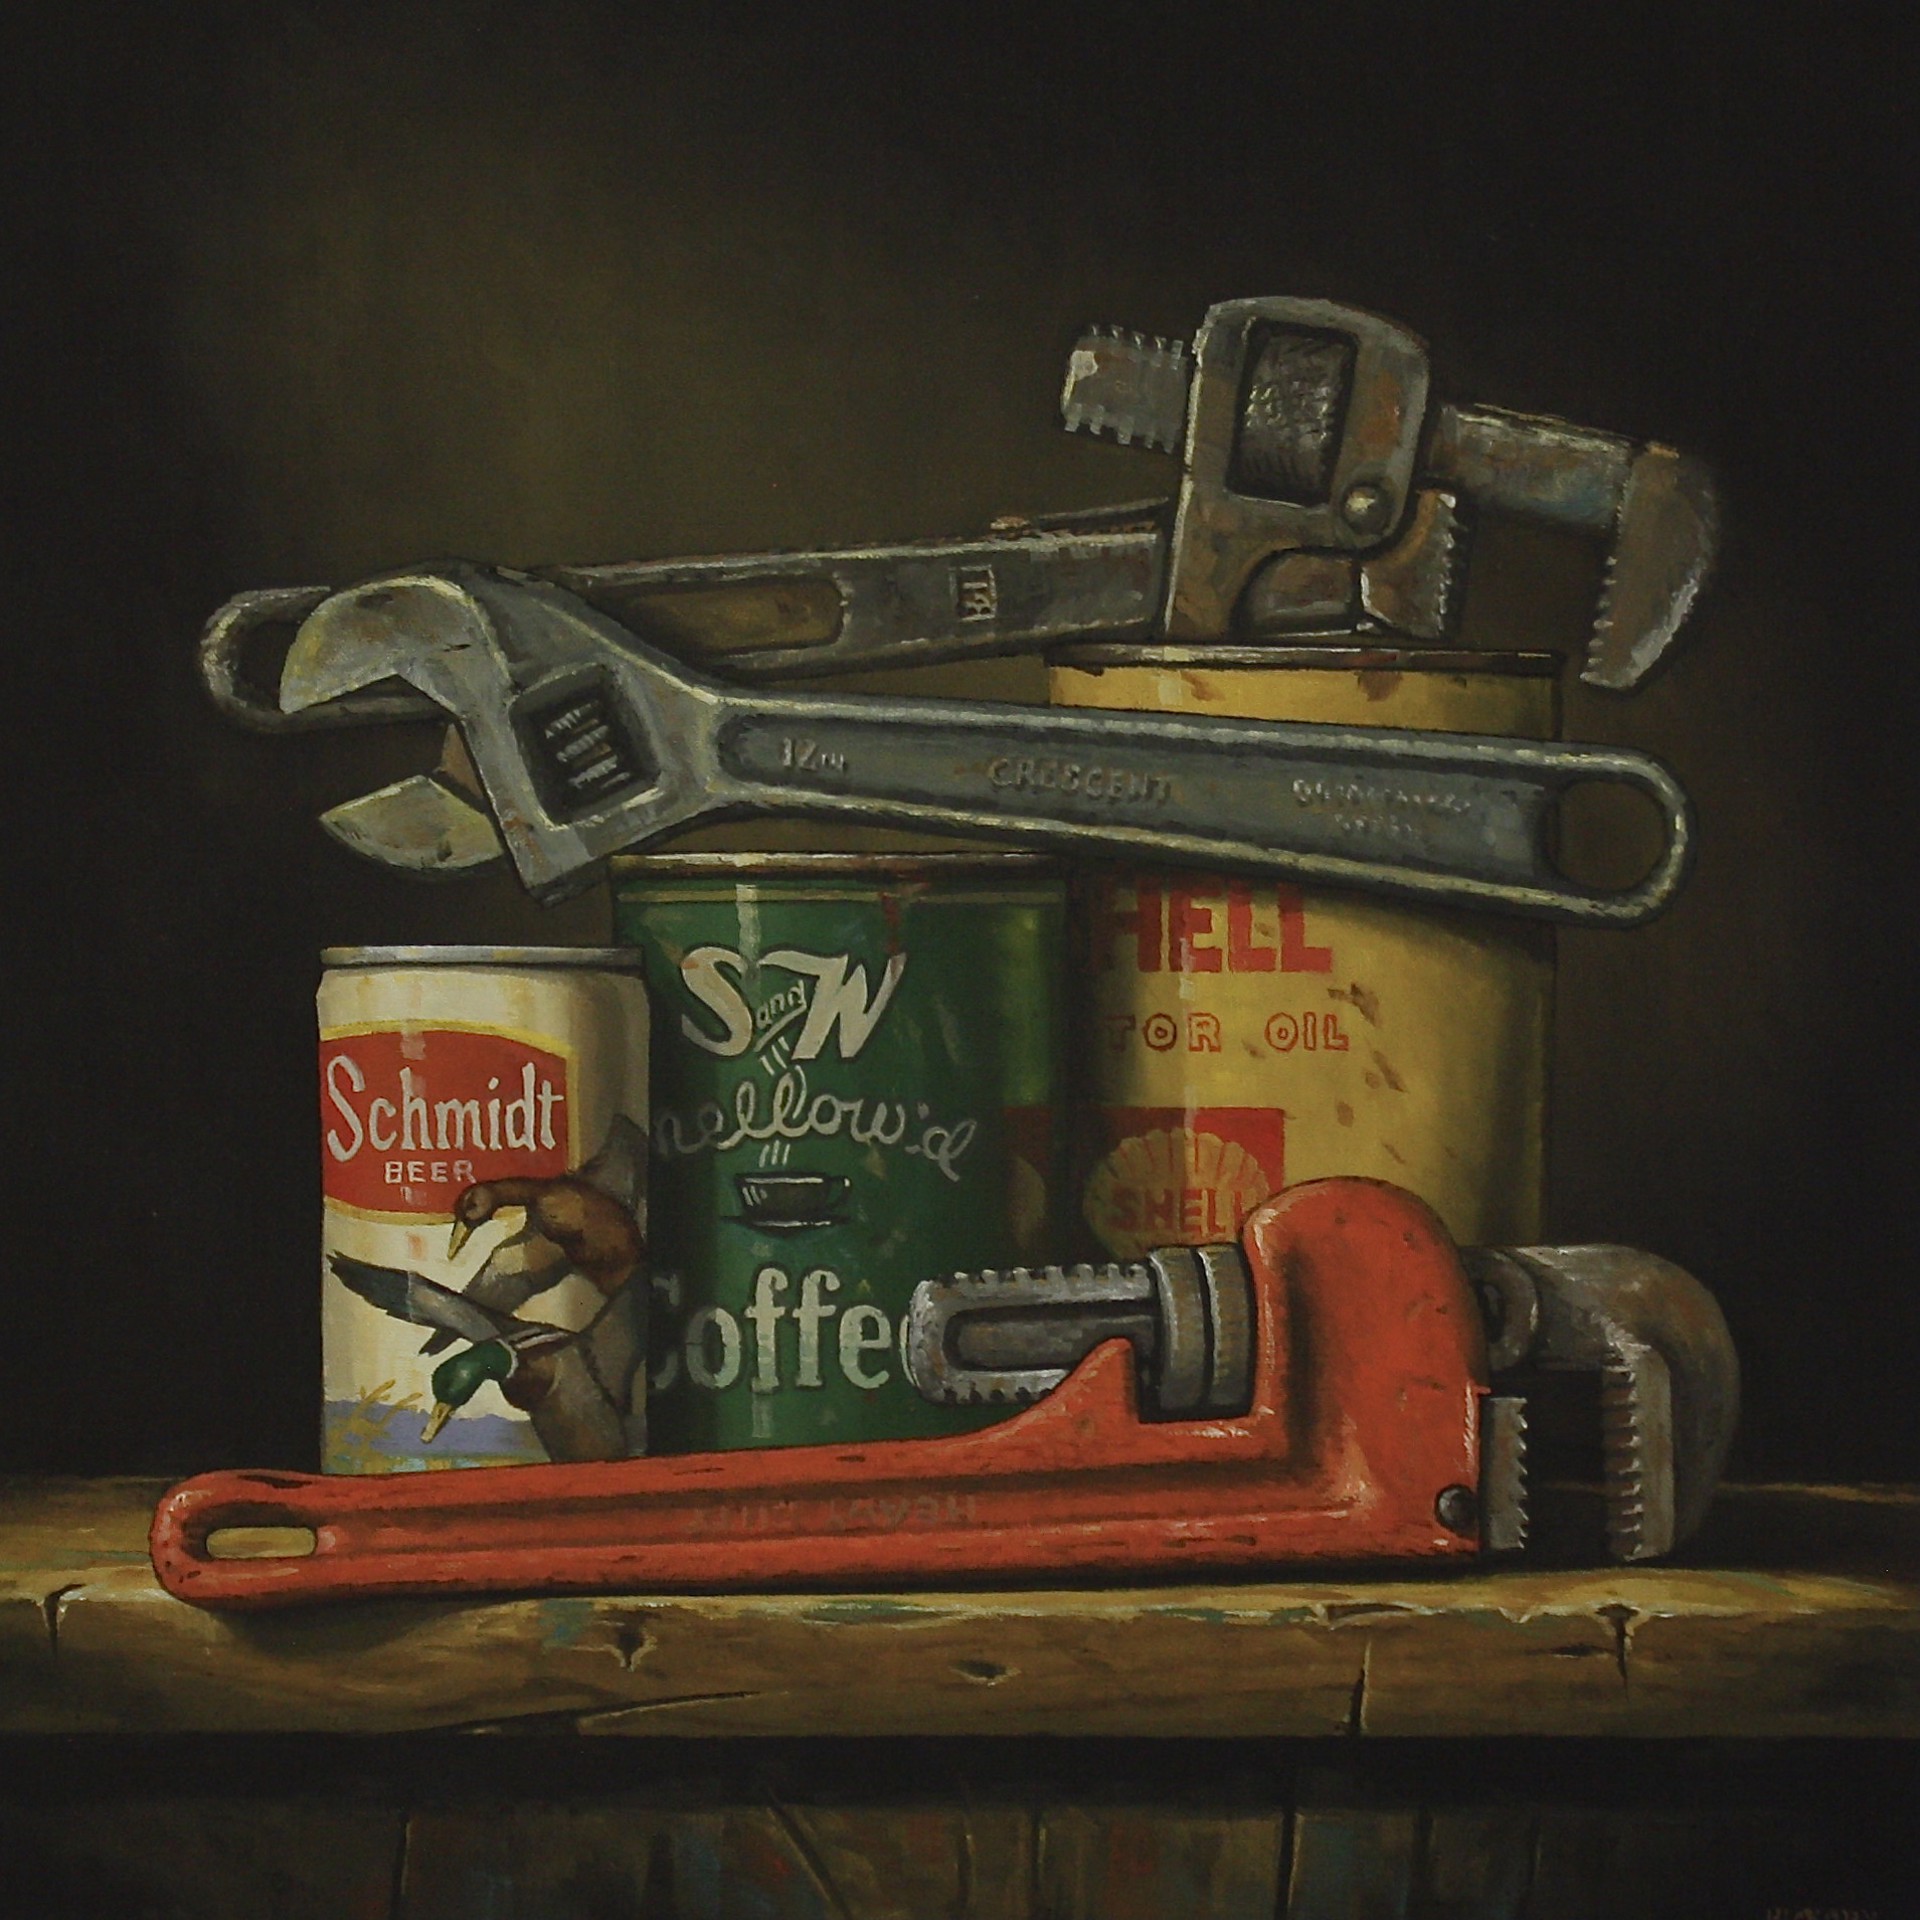 Wrenches by Hickory Mertsching